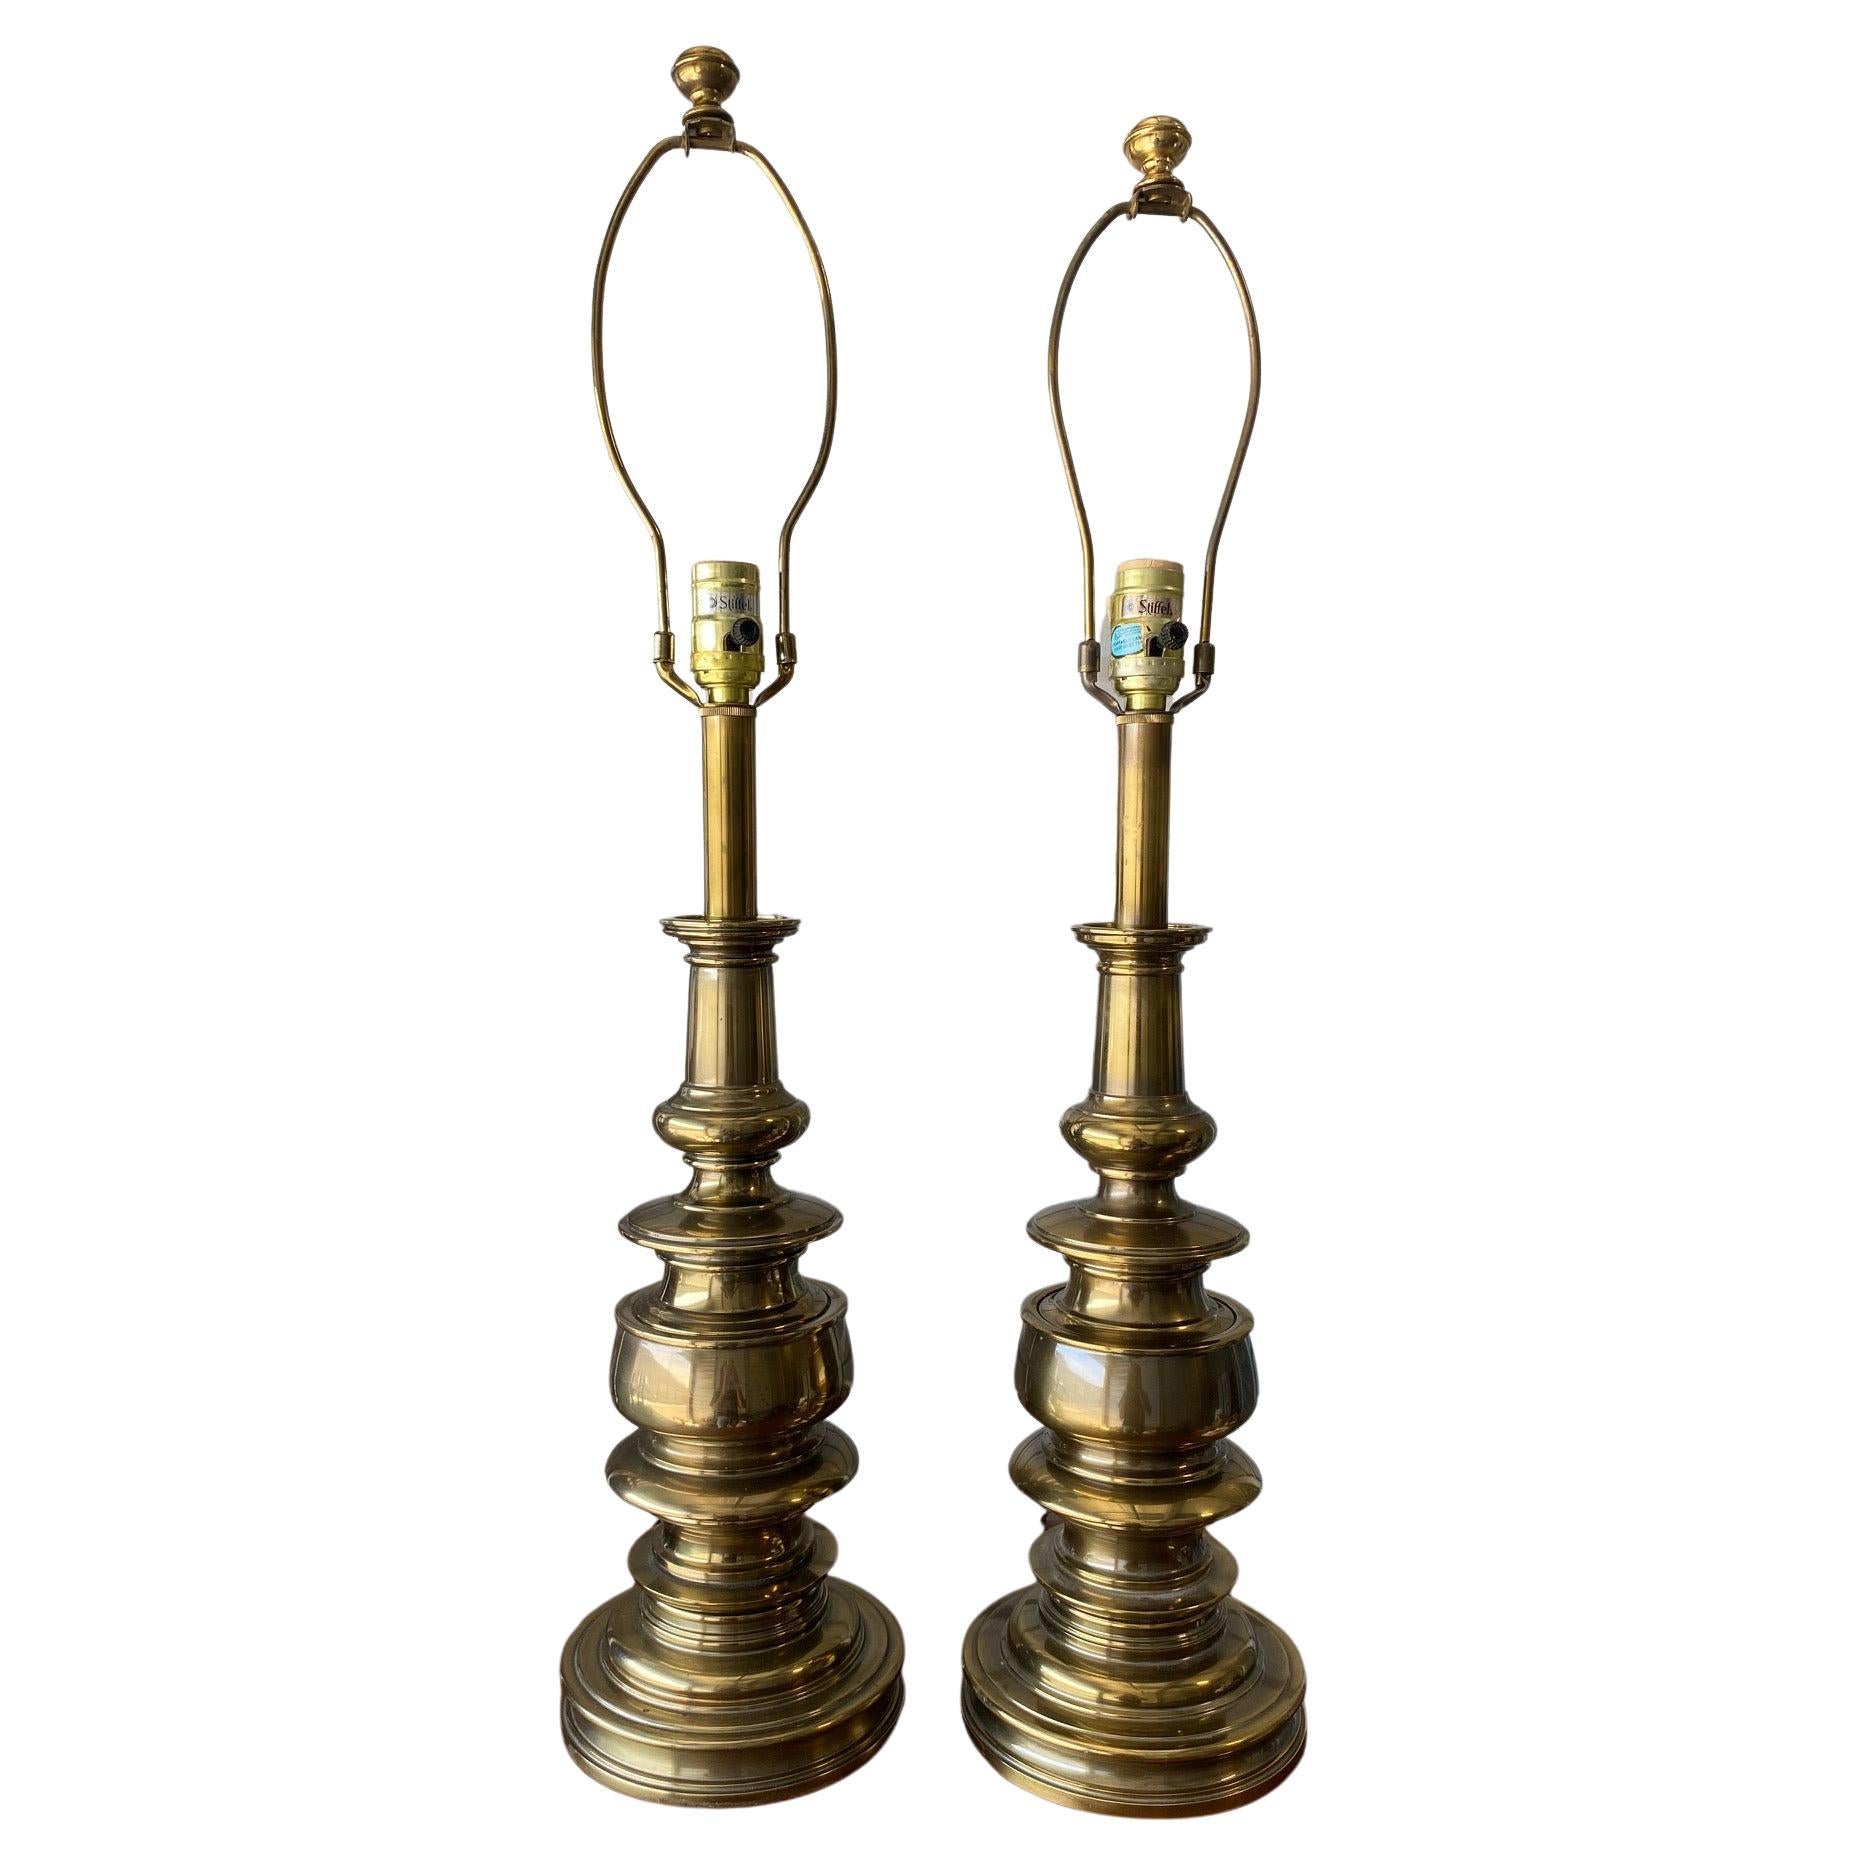 Pair of Traditional Vintage Brass Gold Table Lamps by Stiffel